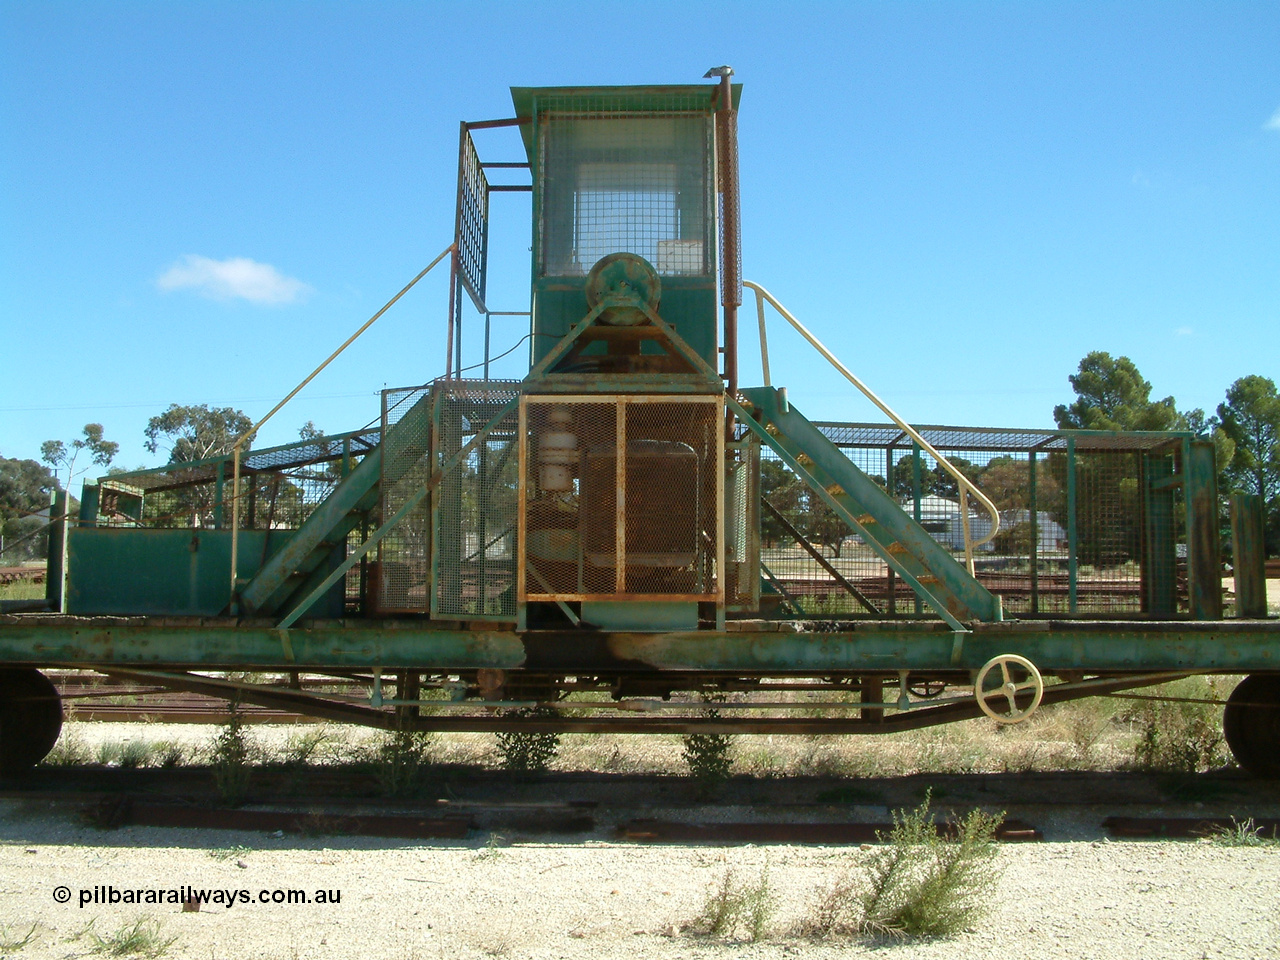 030411 110005
Kimba, rail recovery winch waggon EZWL 2, shows cabin mounted above motor, built using underframe of broad gauge horse box BH 4331. To Eyre Peninsula 1992, recoded then from AZWL. Scrapped in 2005.
Keywords: EZWL-type;EZWL2;SAR-Islington-WS;BH-type;BH4331;